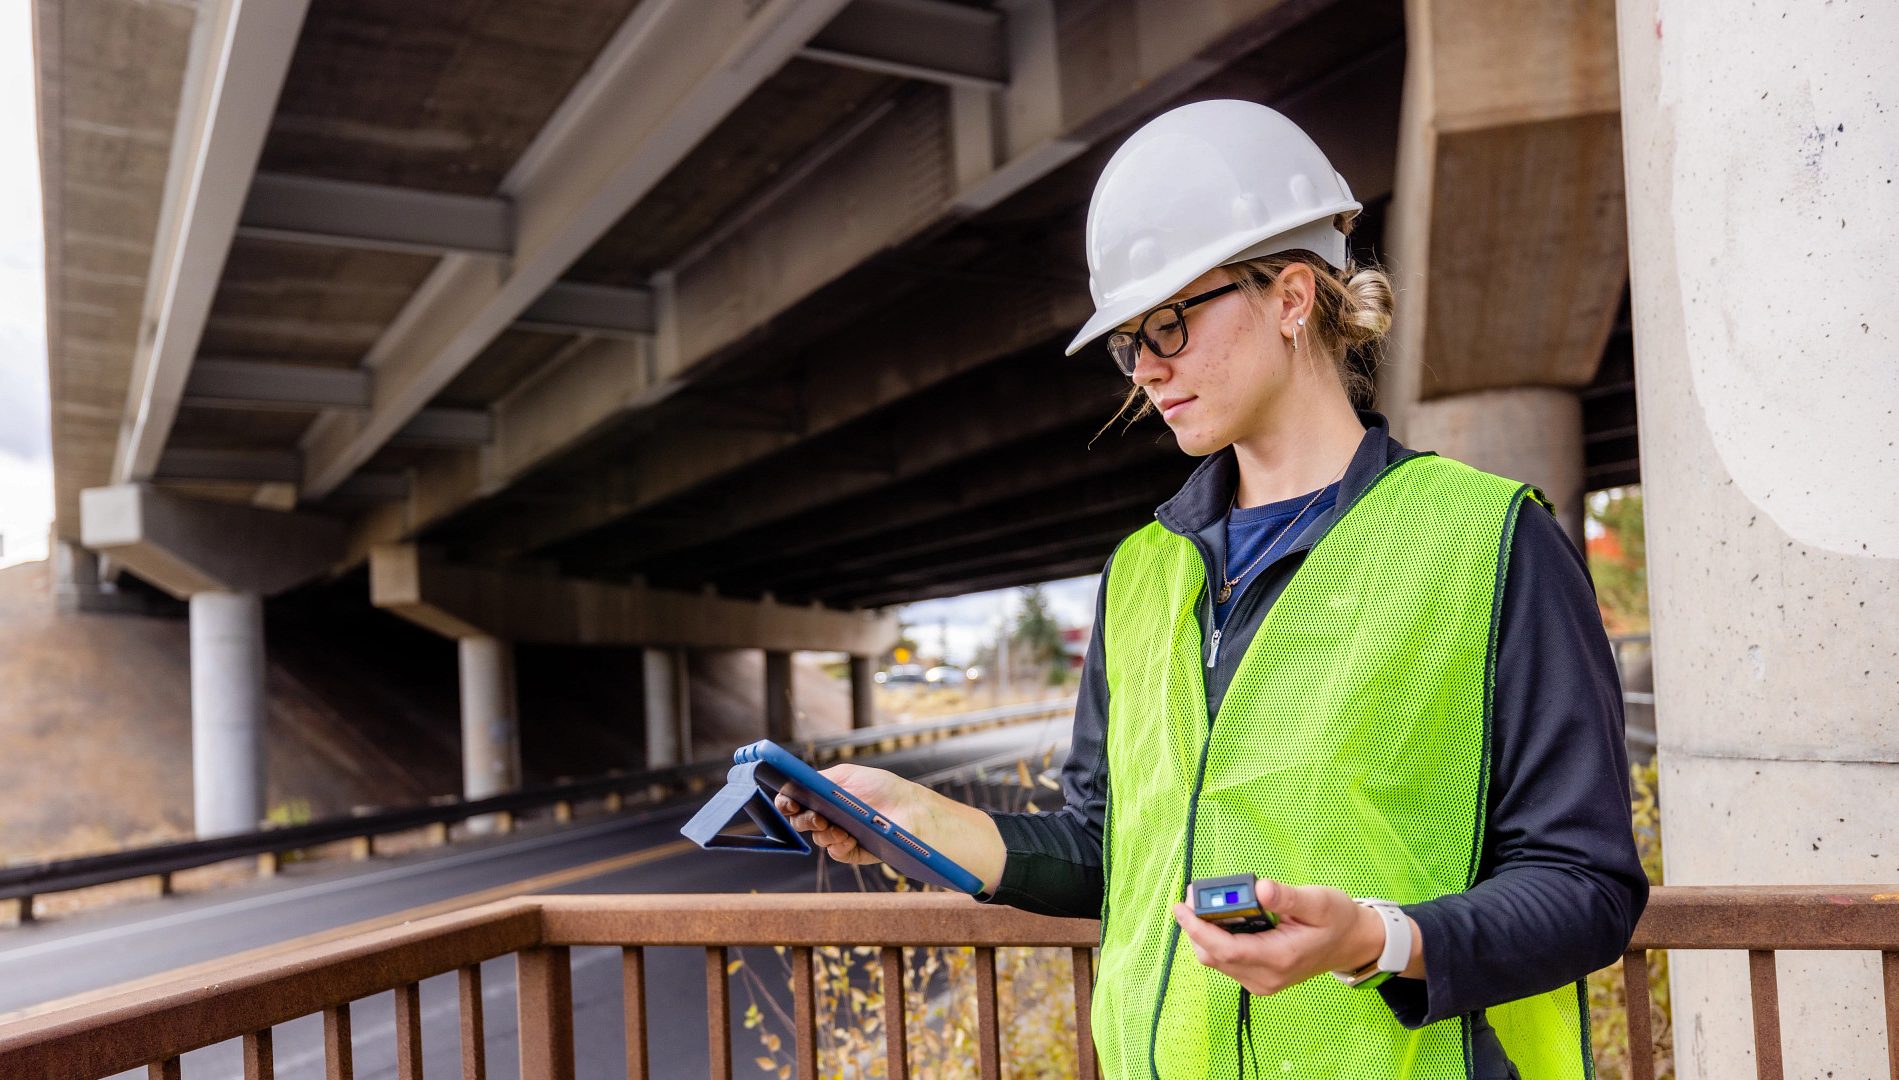 Civil Engineer major Jenna Hays, wearing a safety vest and hard hat, stands under bridge while looking at data on hand-held equipment.